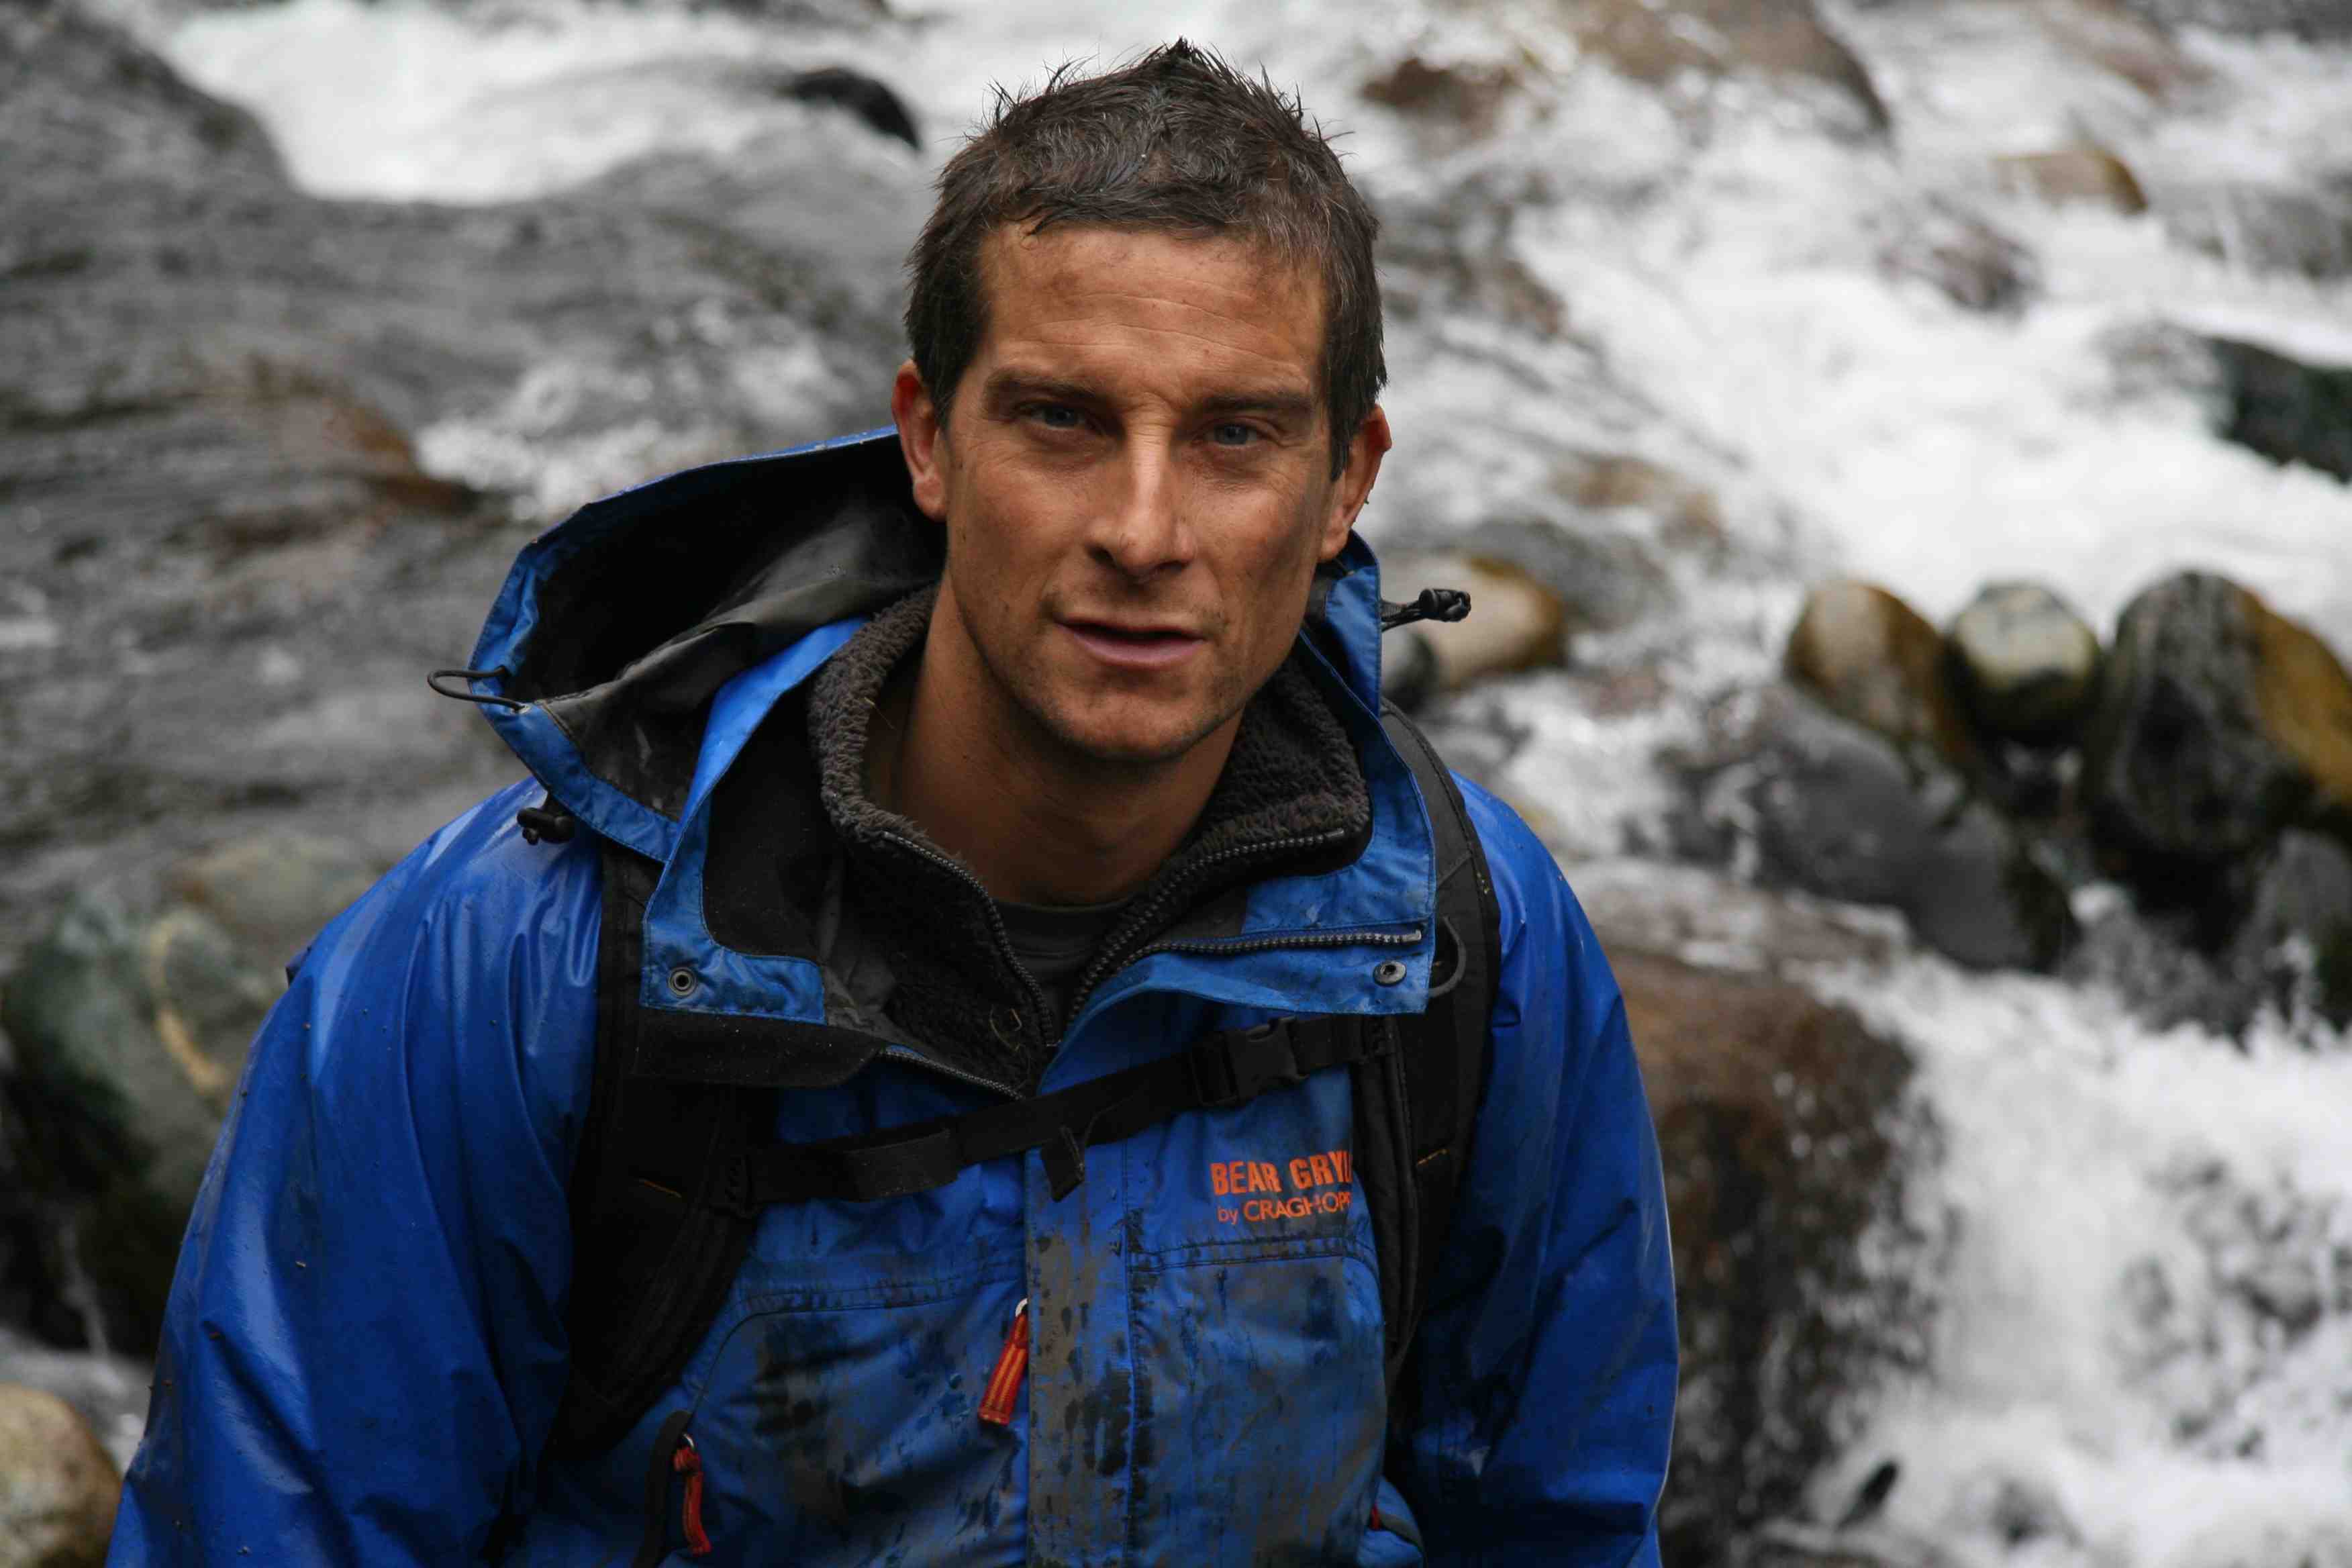 How did Bear Grylls break his back? What can I learn today?